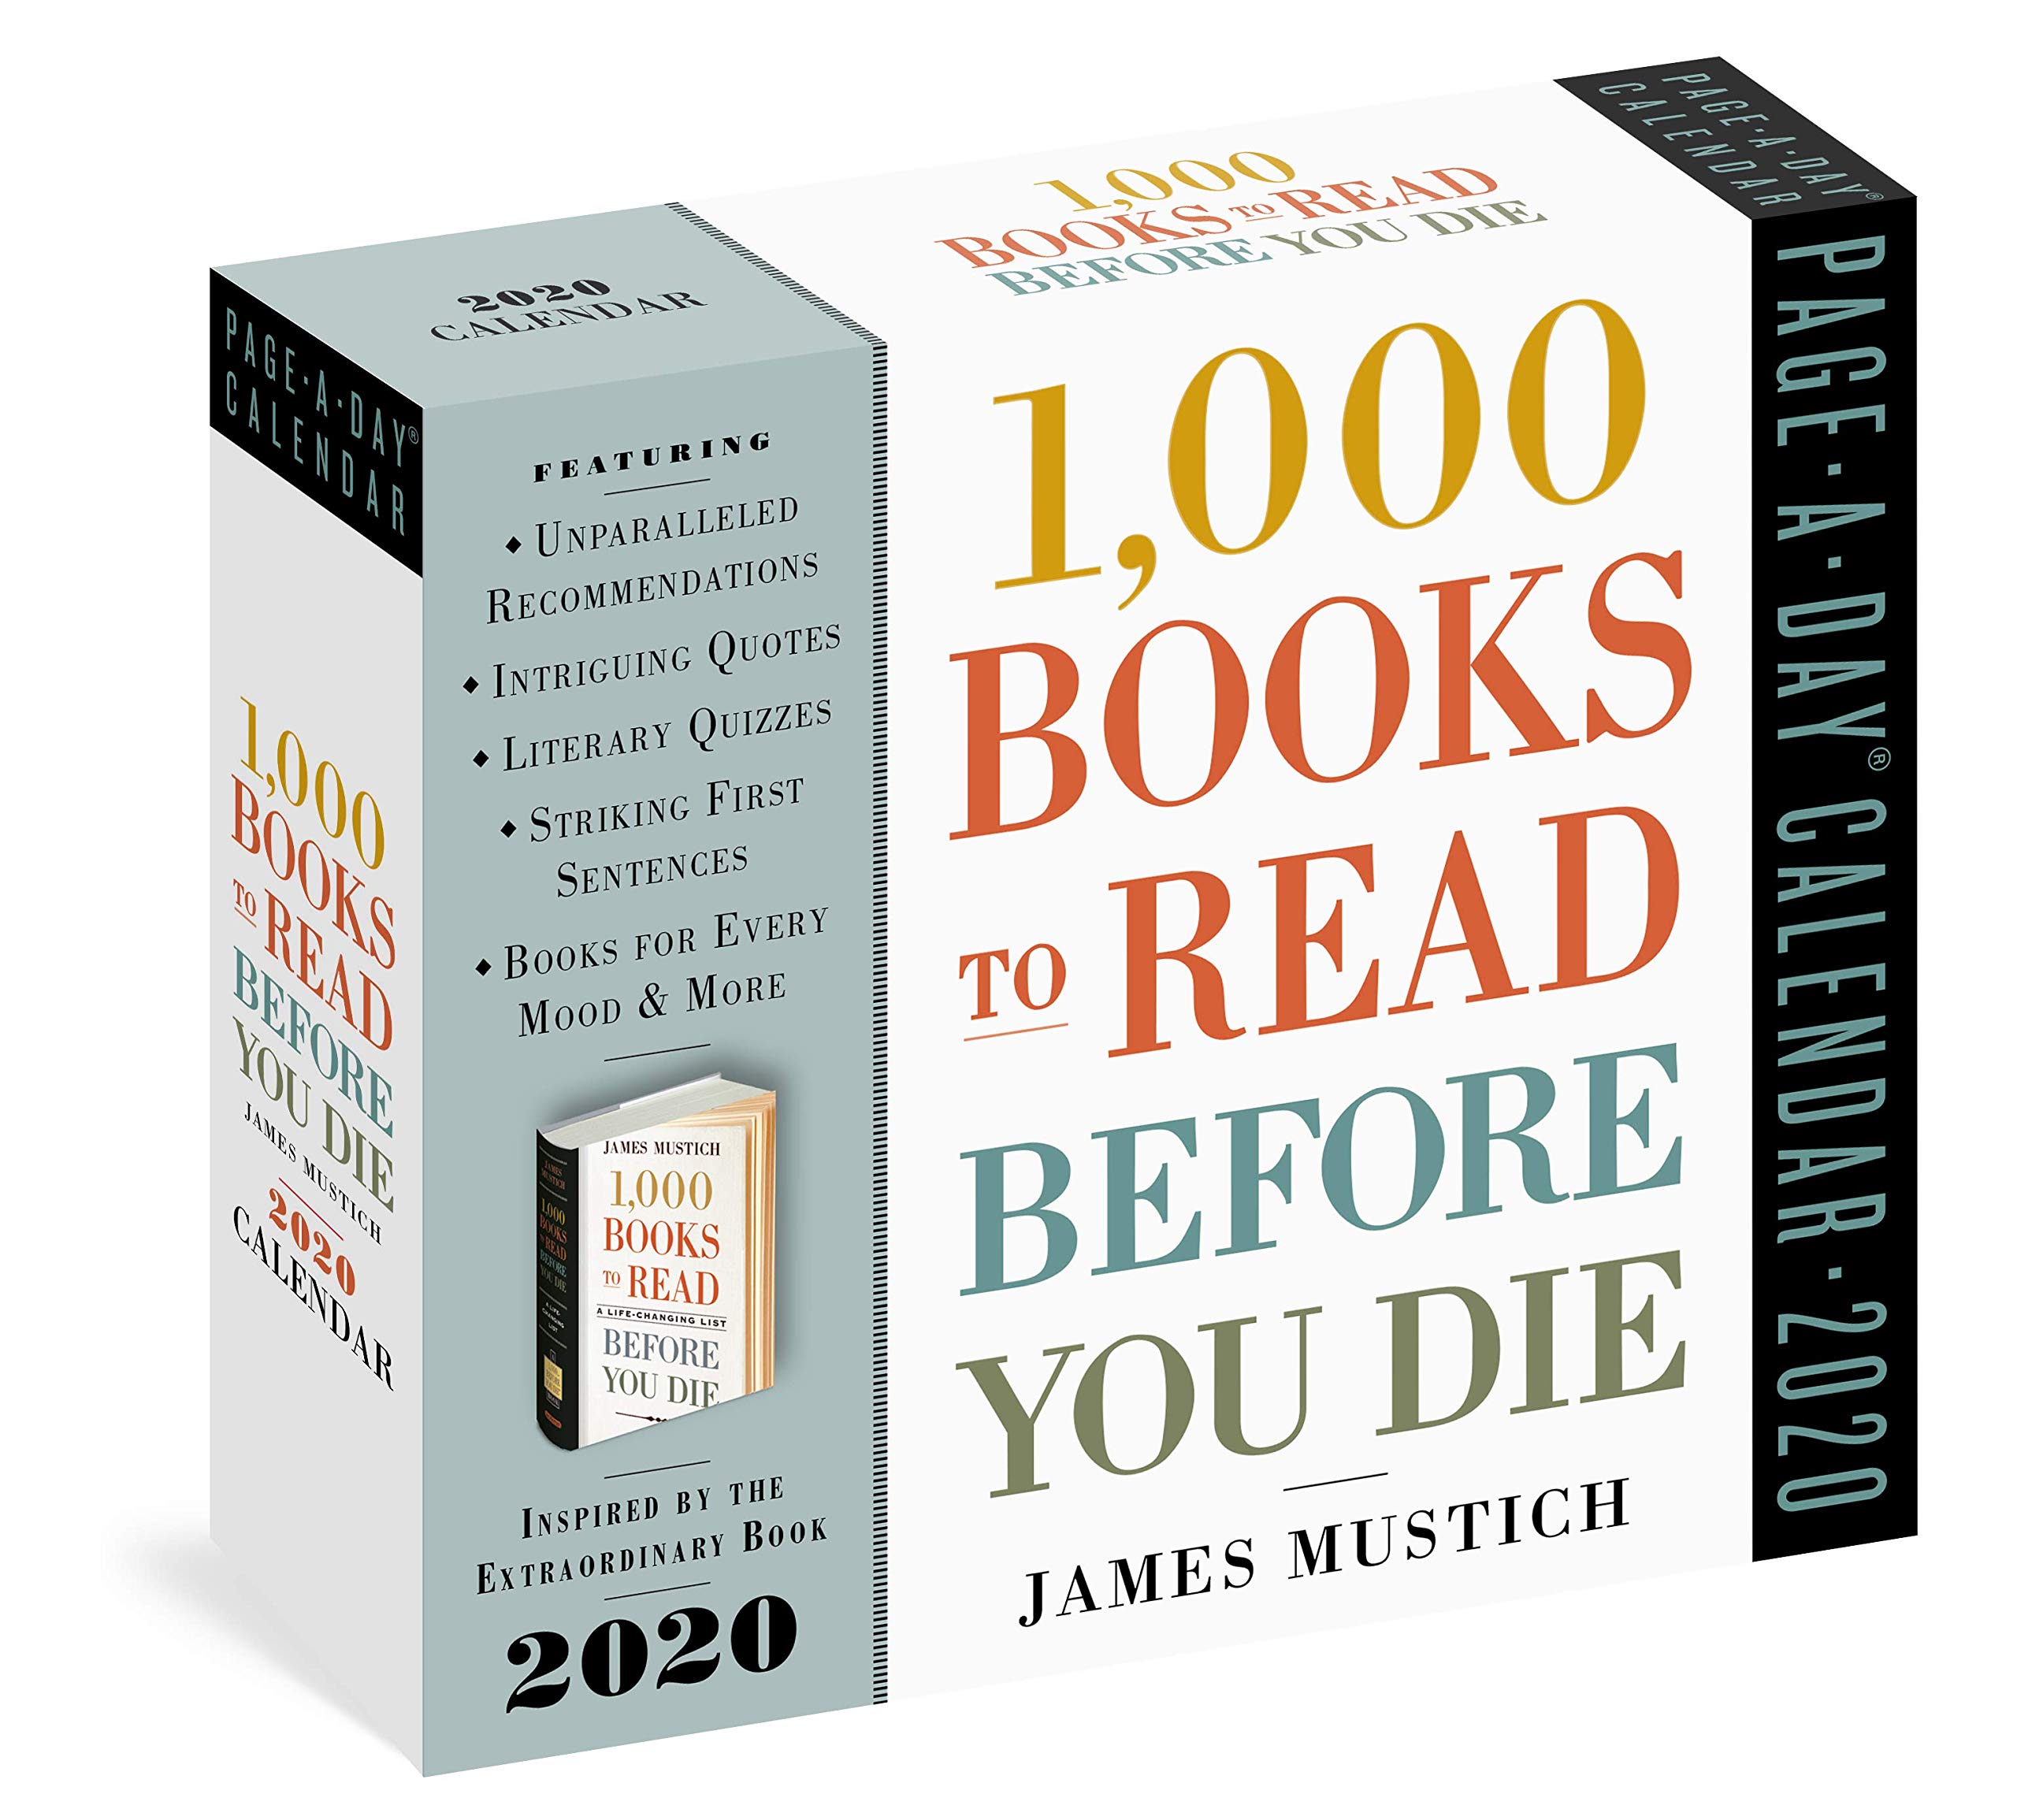 Calendar 2020 PageADay 1000 Books to Read Before You Die